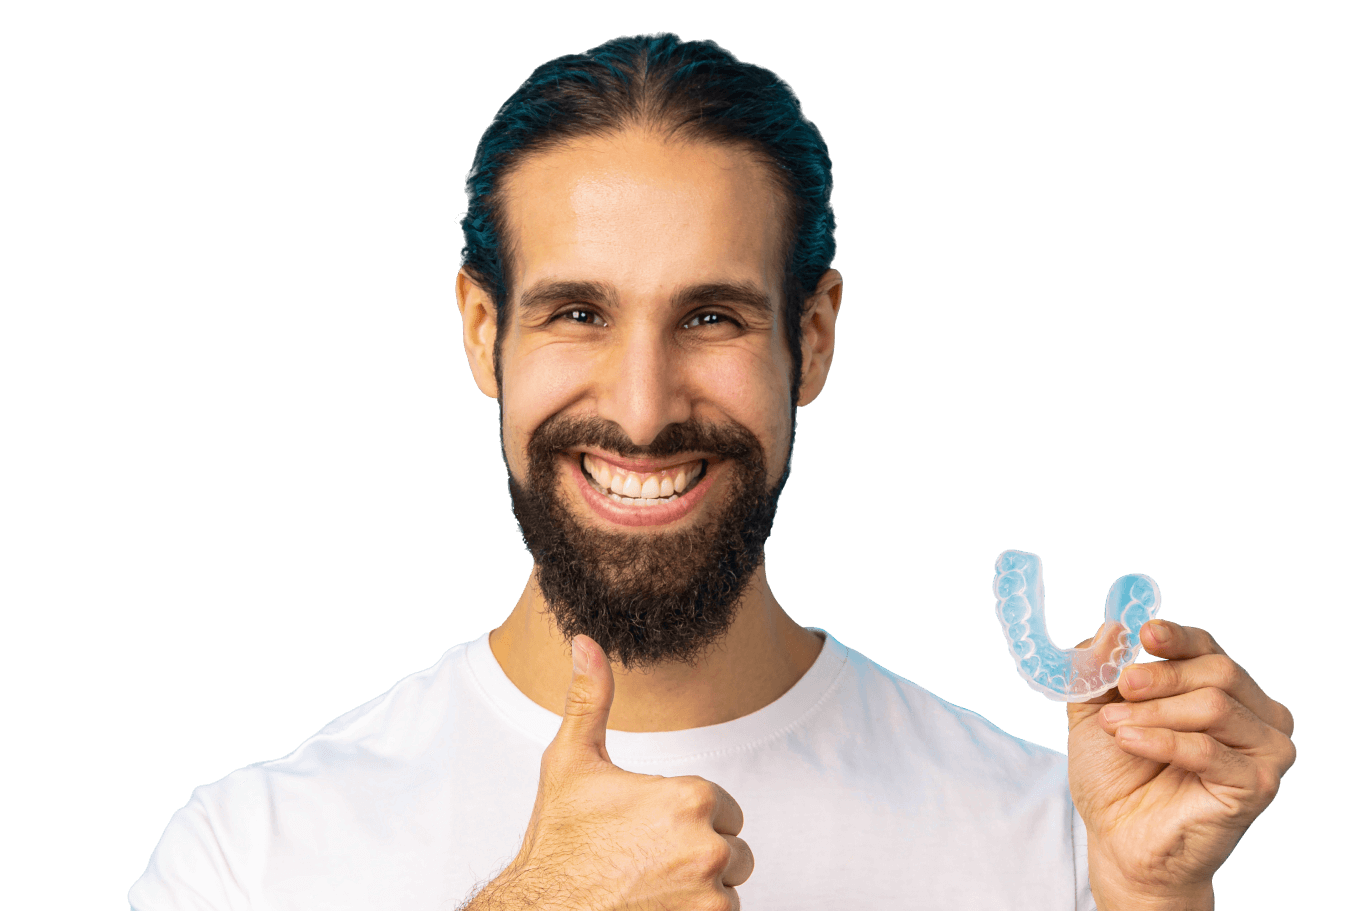 Man gives a thumbs up with one hand, holding invisible aligners in the other